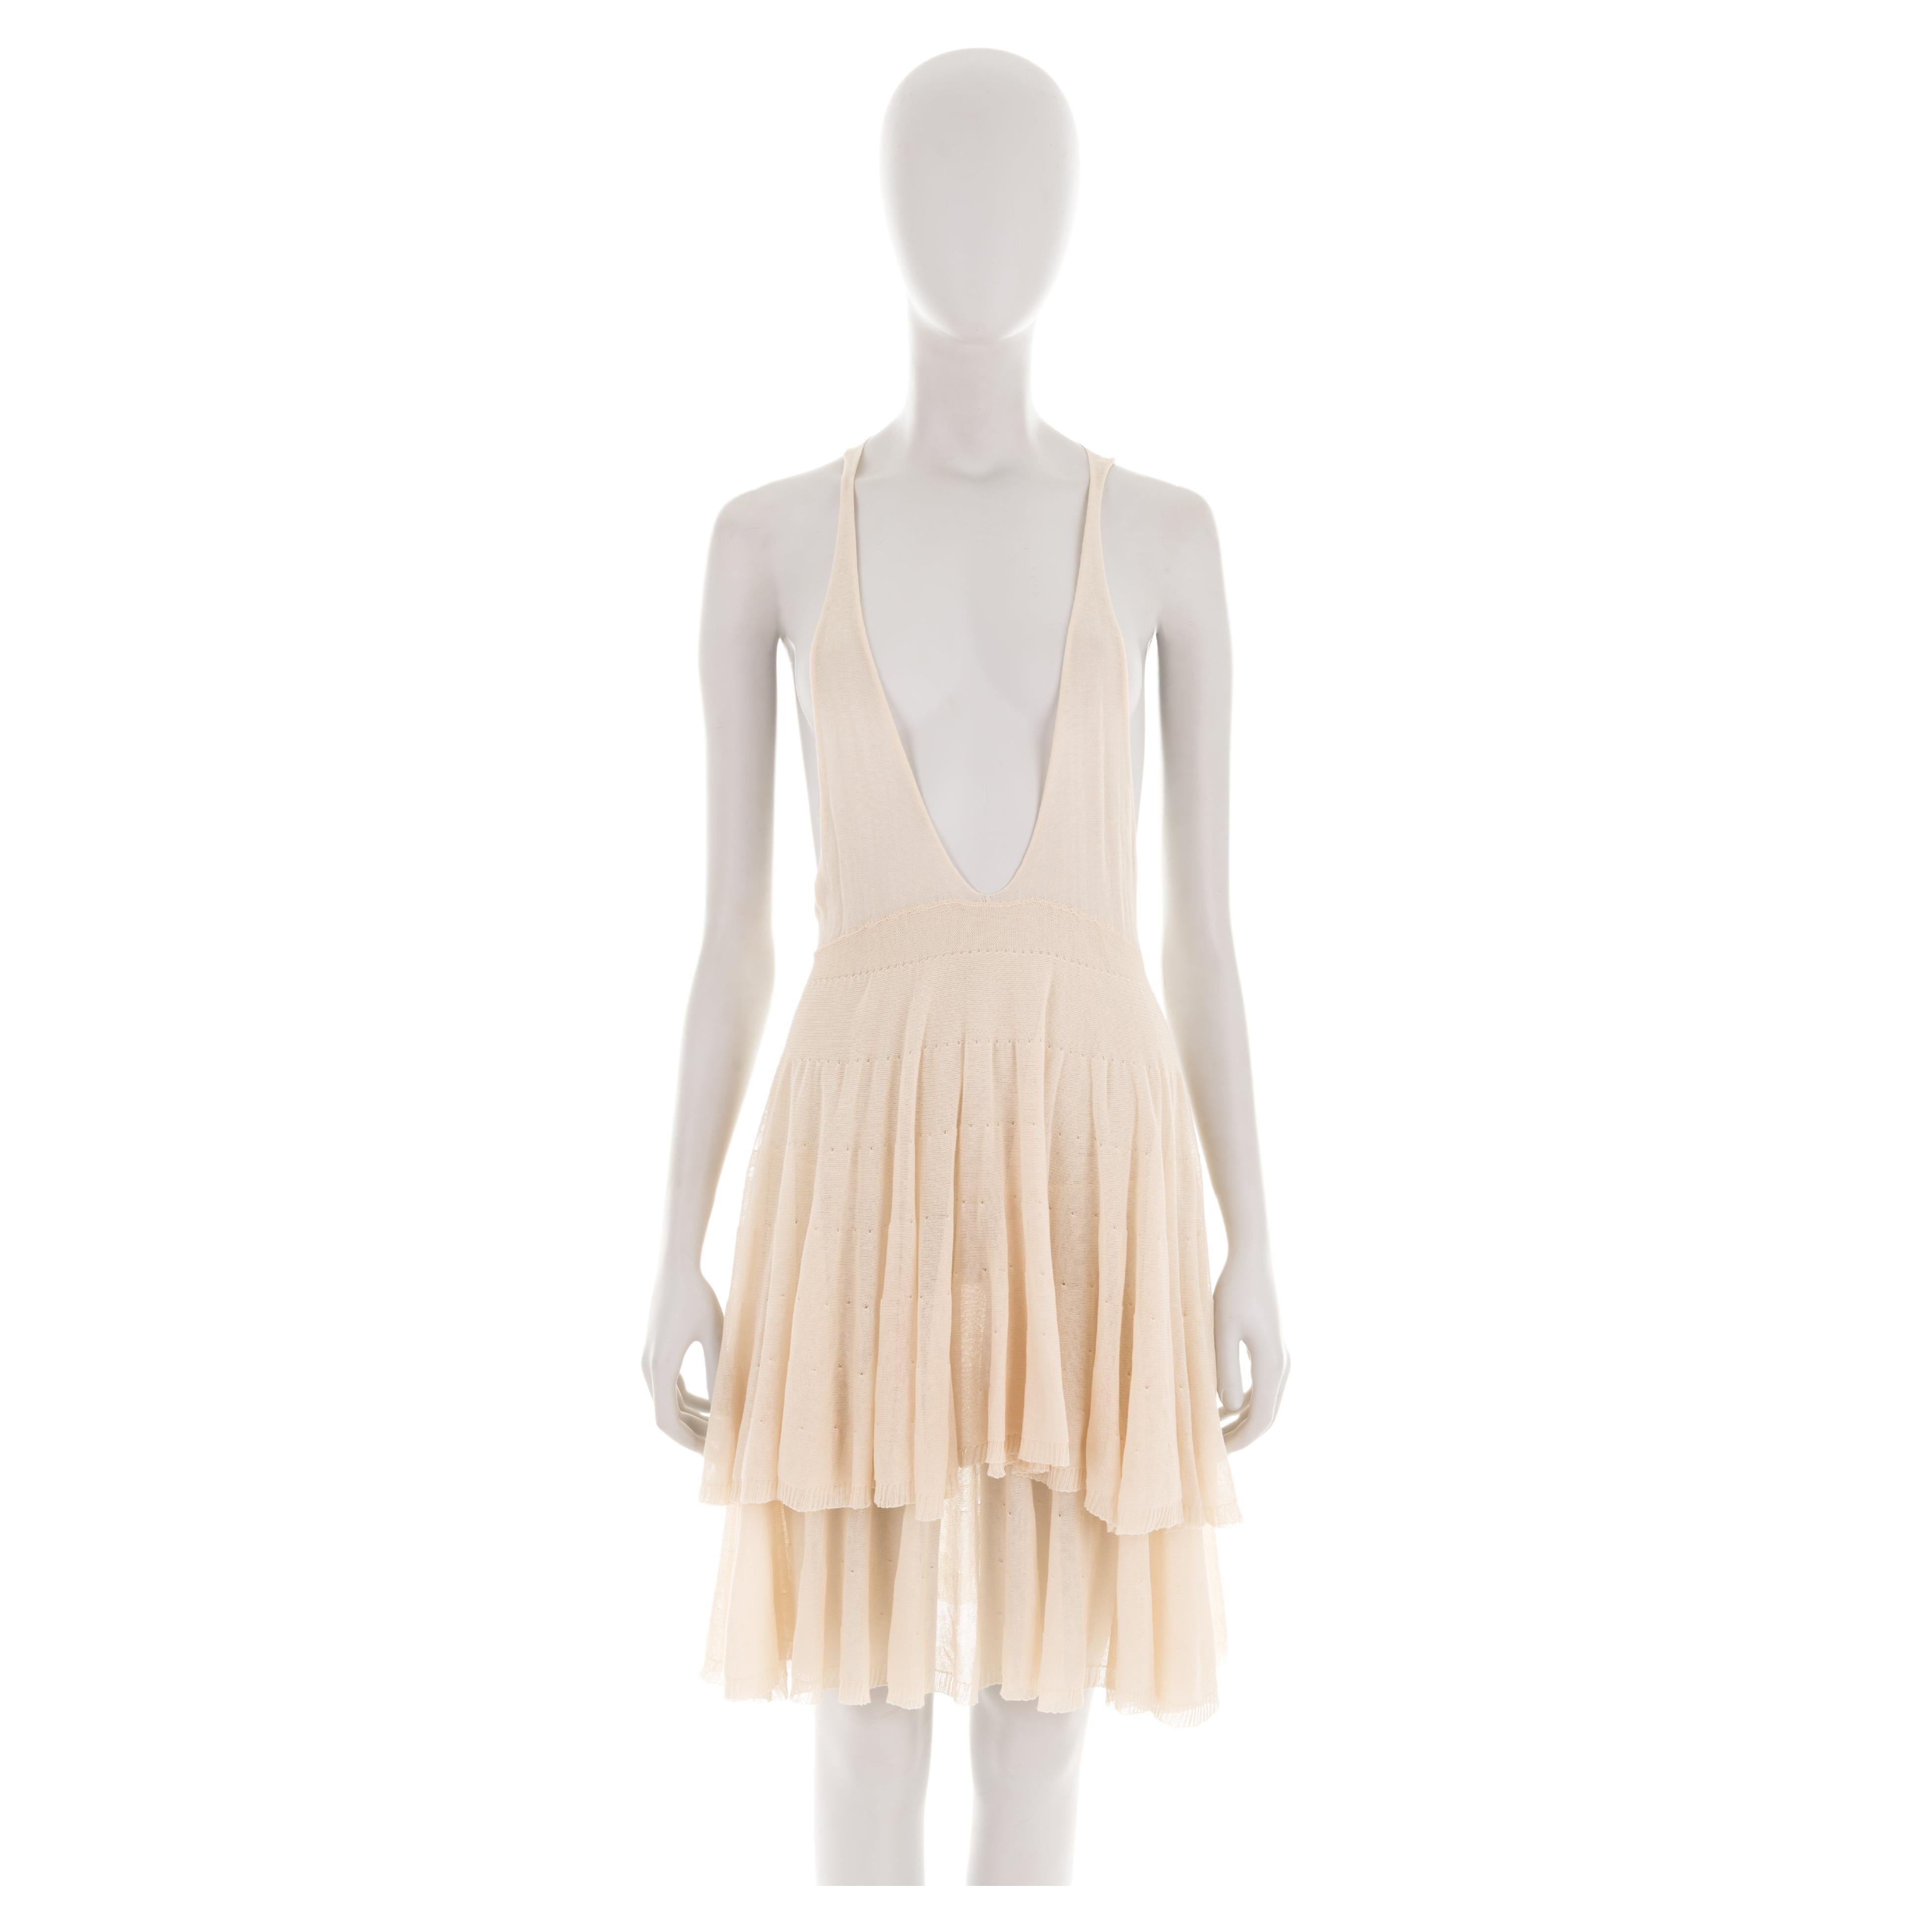 - Dsquared2 spring-summer 2006 
- Sold by Gold Palms Vintage
- Ruffled knit mini dress
- Plunging neckline with thin straps 
- Size: XS